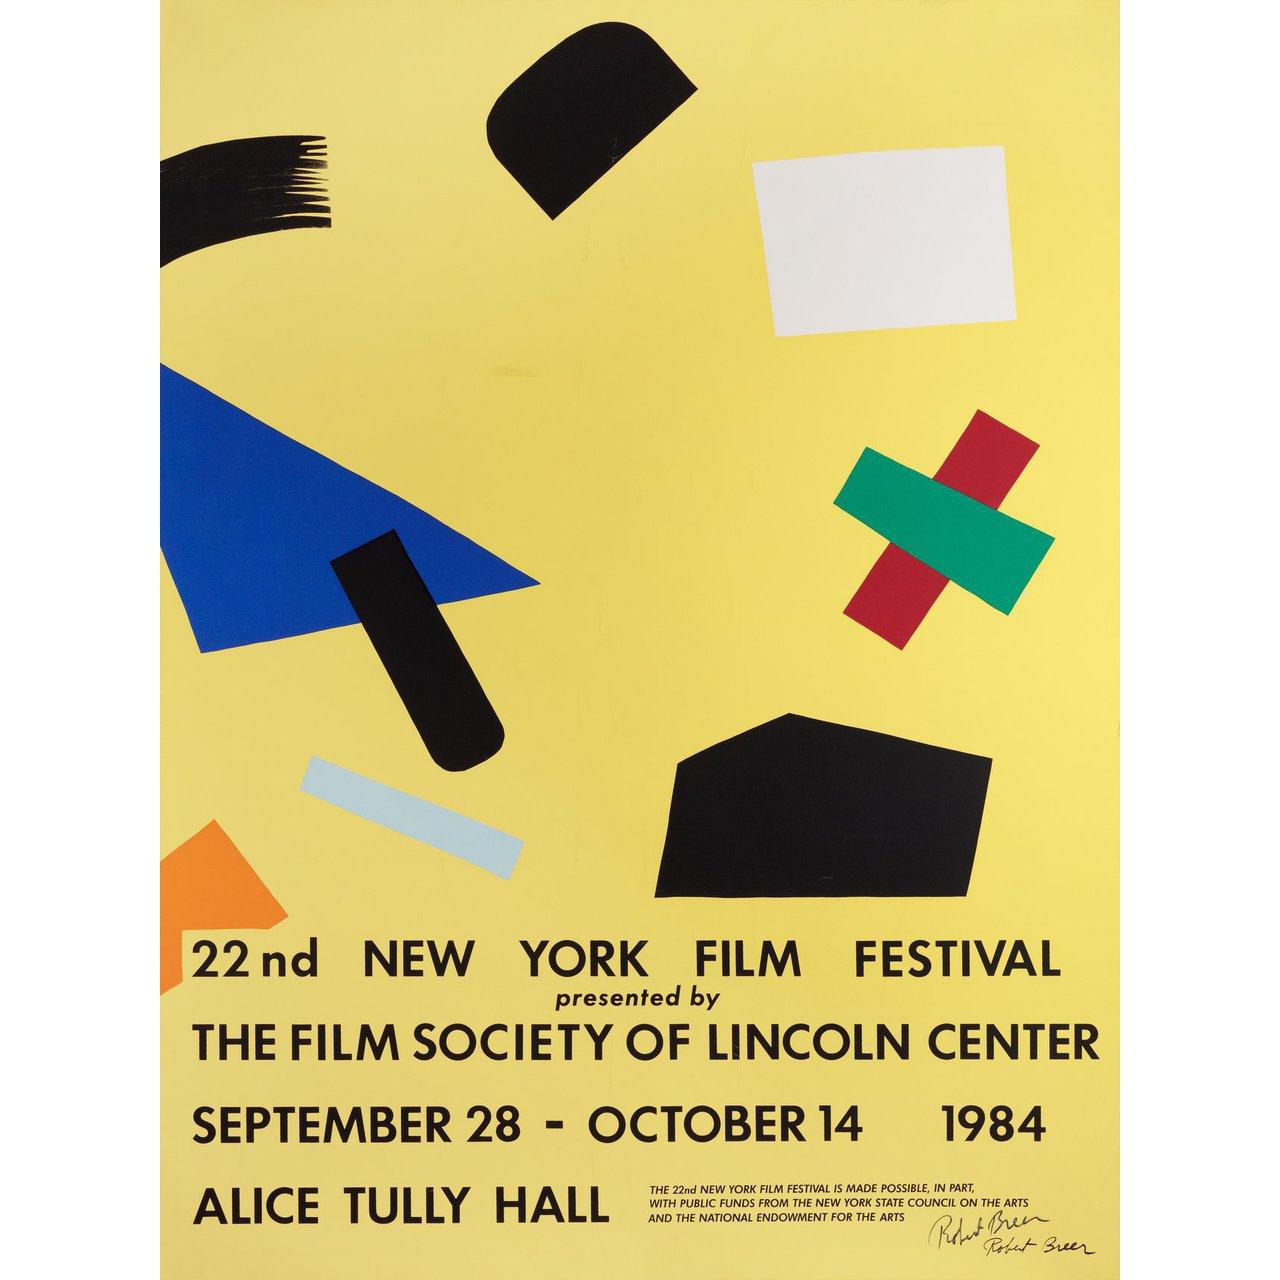 Original 1984 U.S. 30 by 40 poster by Breer. Robert for the 1963 festival New York Film Festival. Signed by Robert Breer. Very Good-Fine condition, rolled. Please note: the size is stated in inches and the actual size can vary by an inch or more.